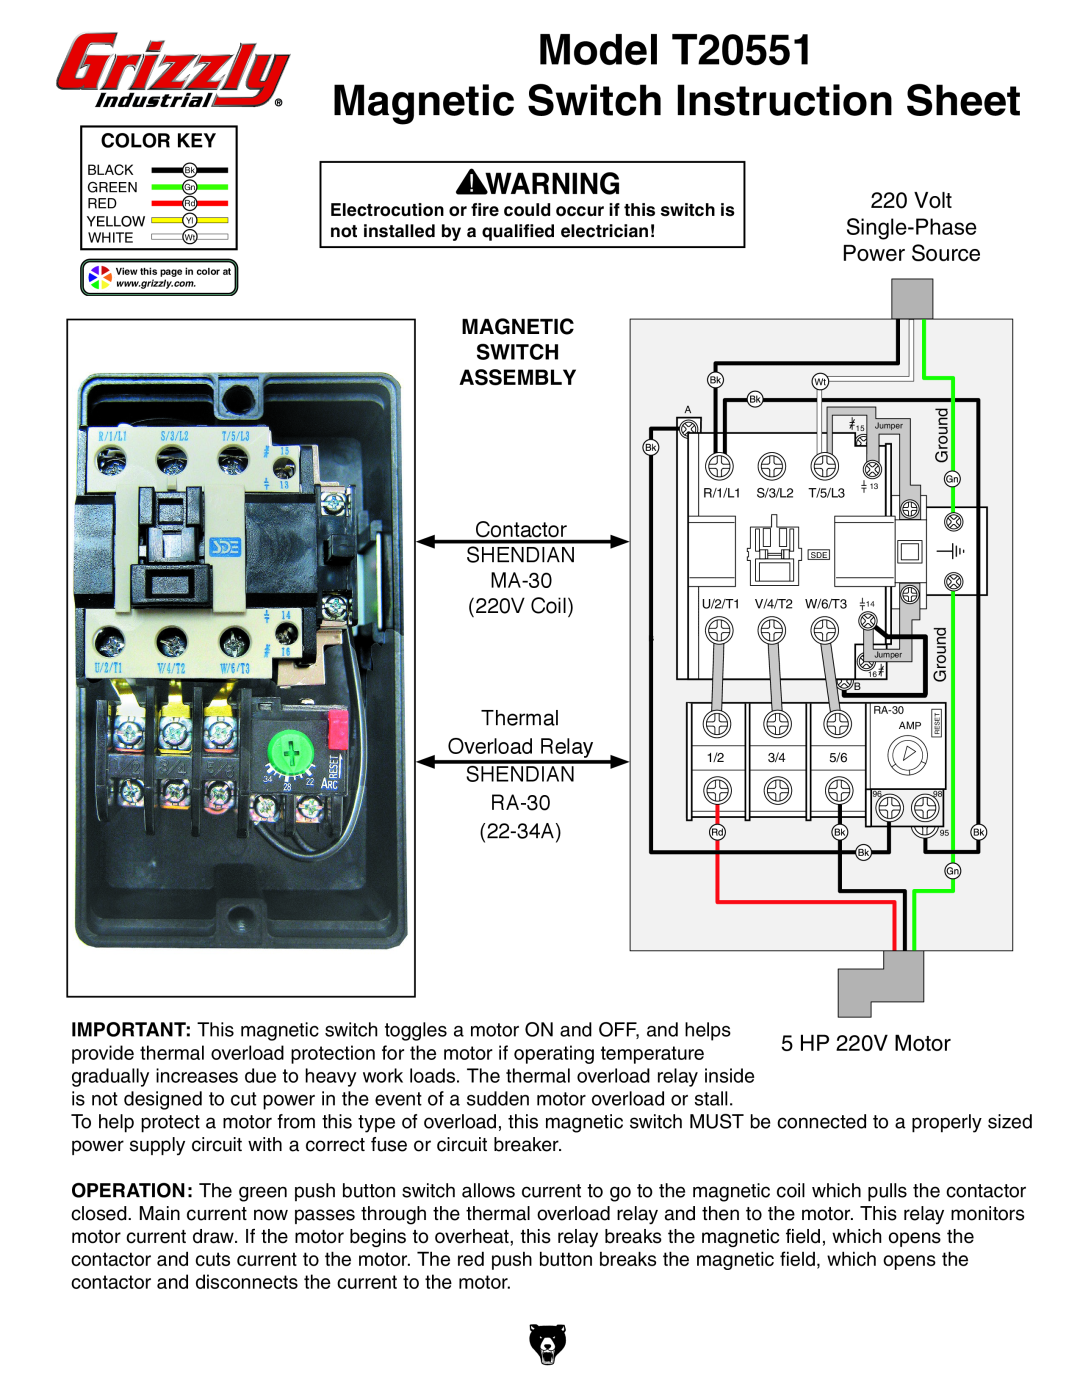 Grizzly instruction sheet Model T20551 Magnetic Switch Instruction Sheet, Magnetic Switch Assembly, Contactor, Shendian 